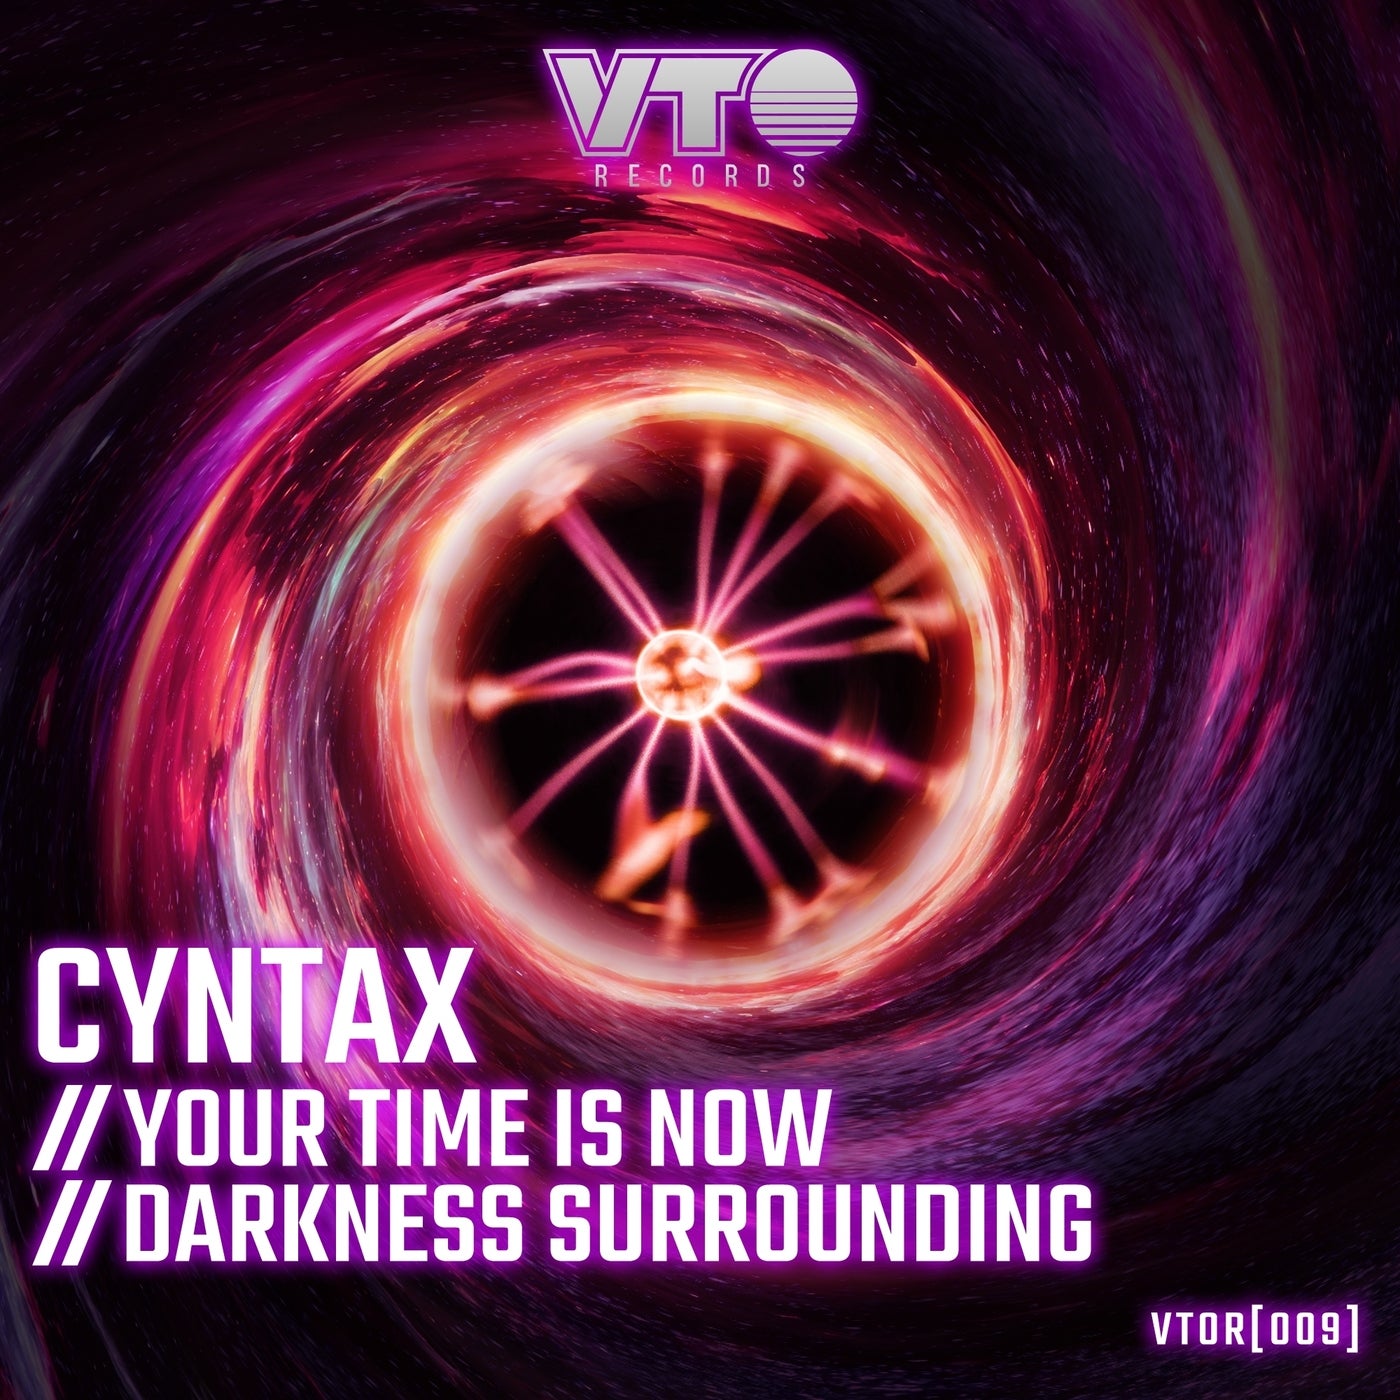 Your Time Is Now / Darkness Surrounding